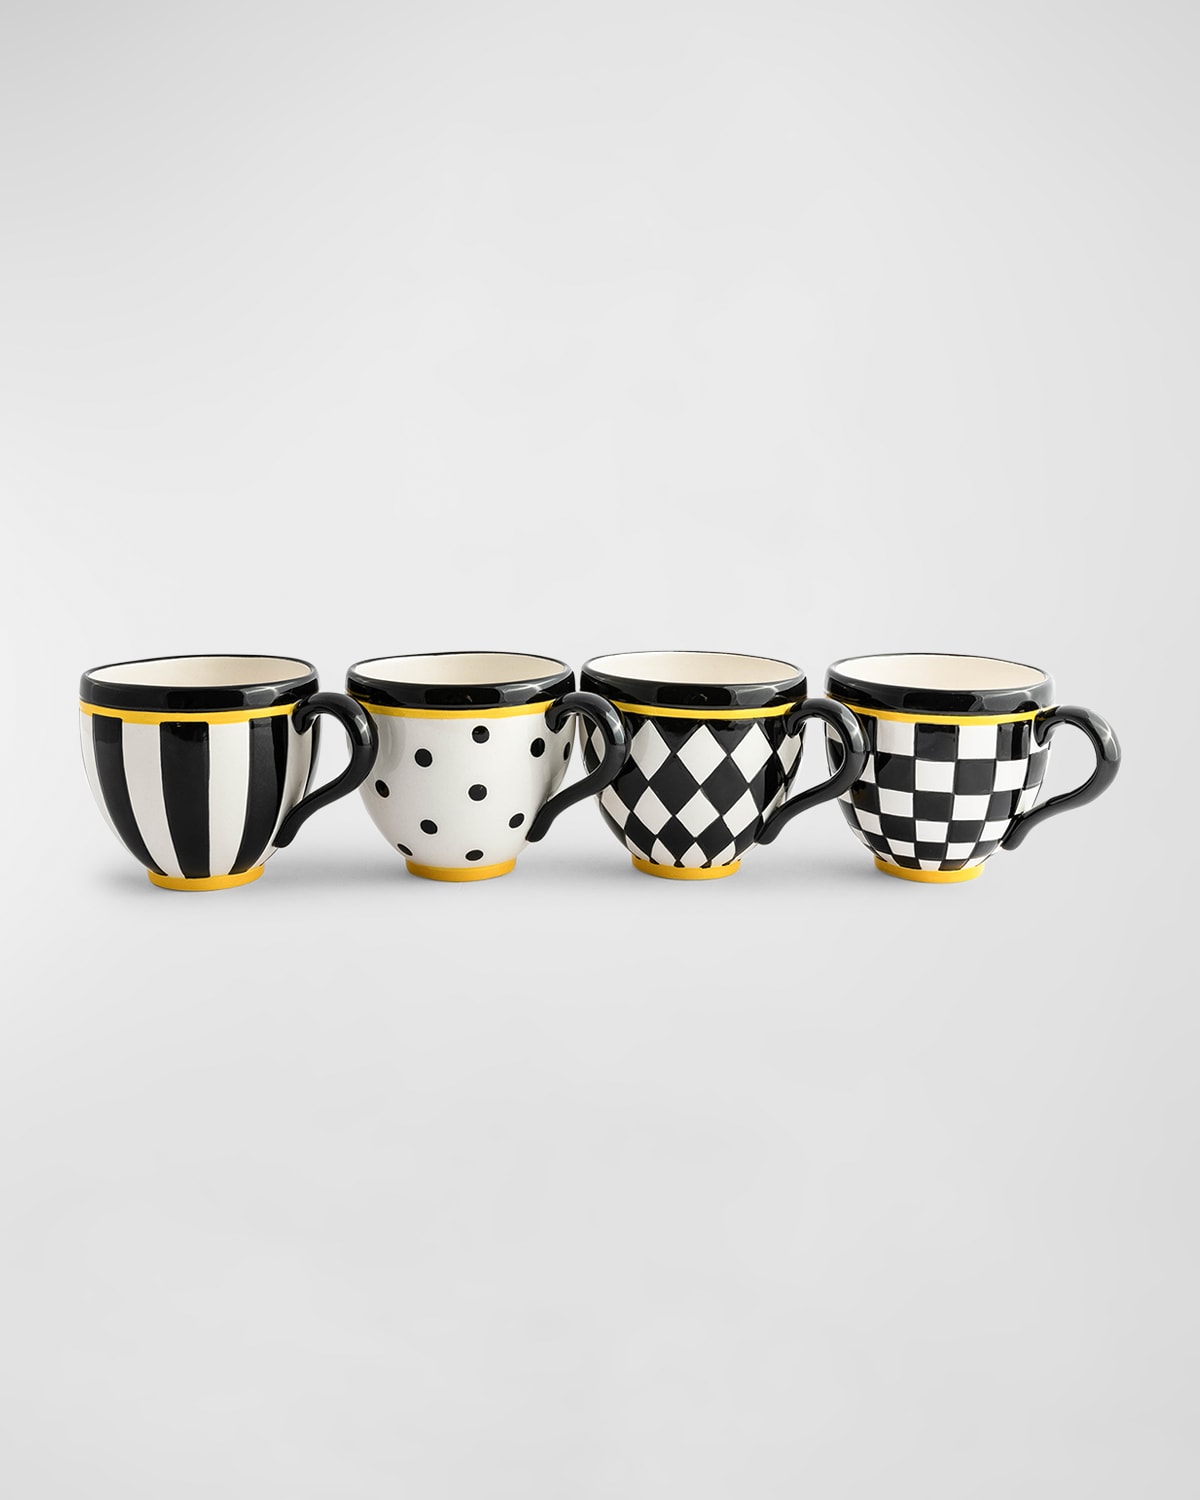 Mackenzie-childs Courtly Mugs, Set Of 4 In Black